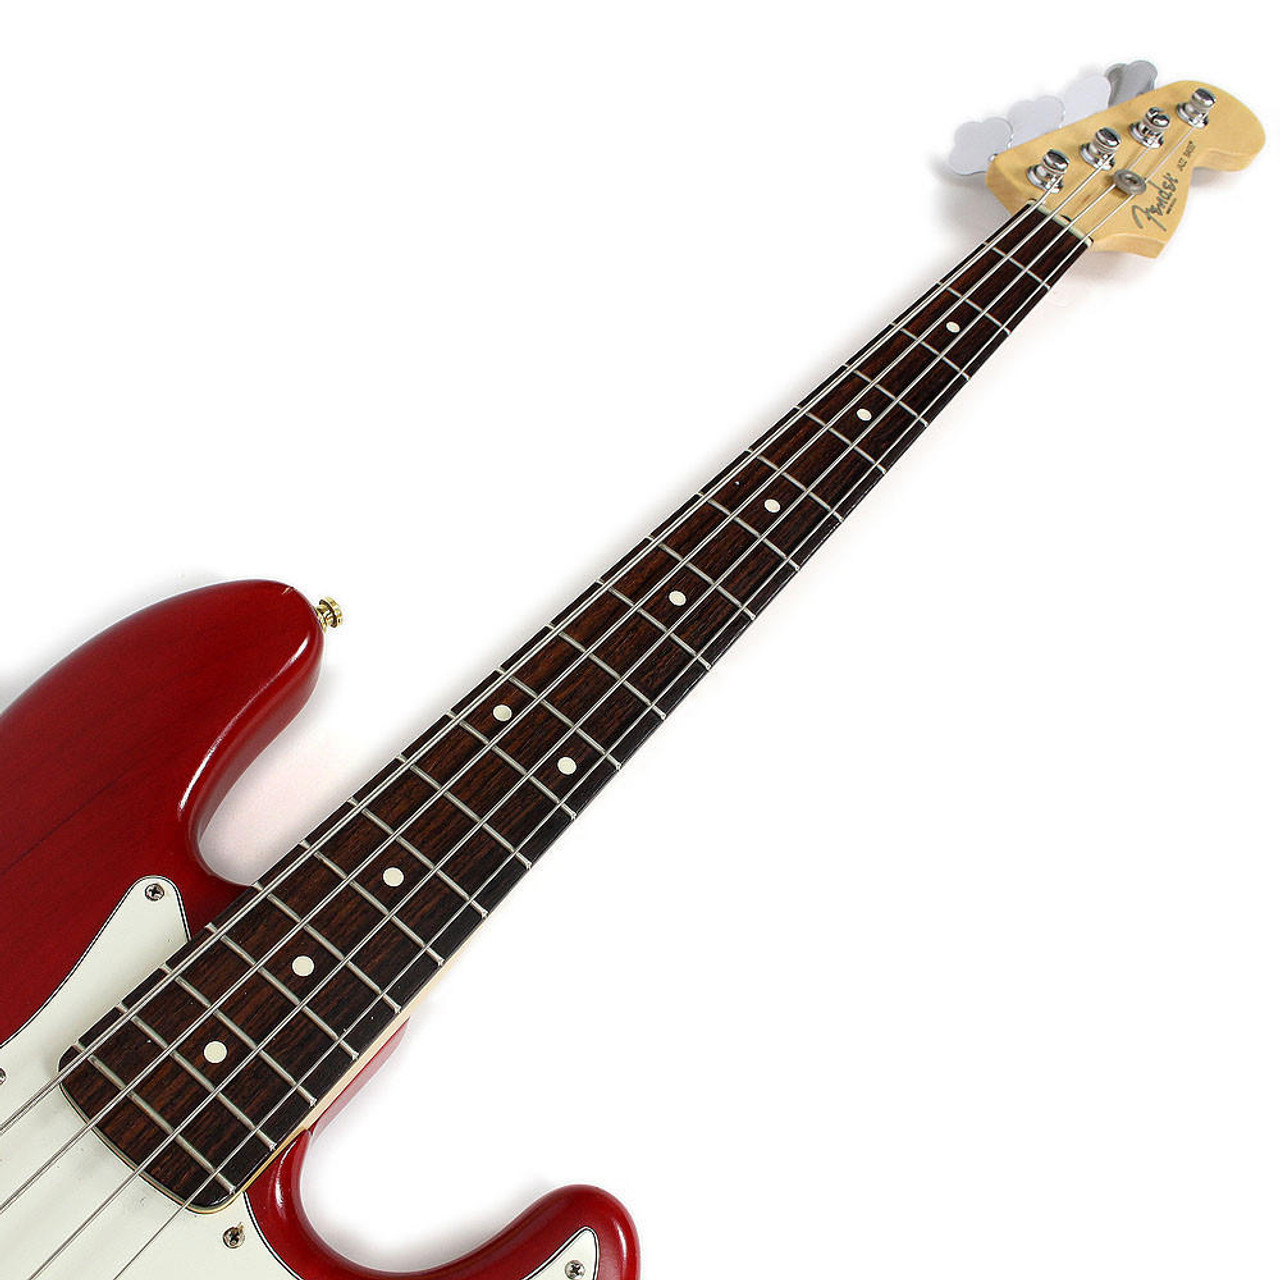 2004 Fender USA Made Jazz Bass Guitar in Translucent Red Finish 